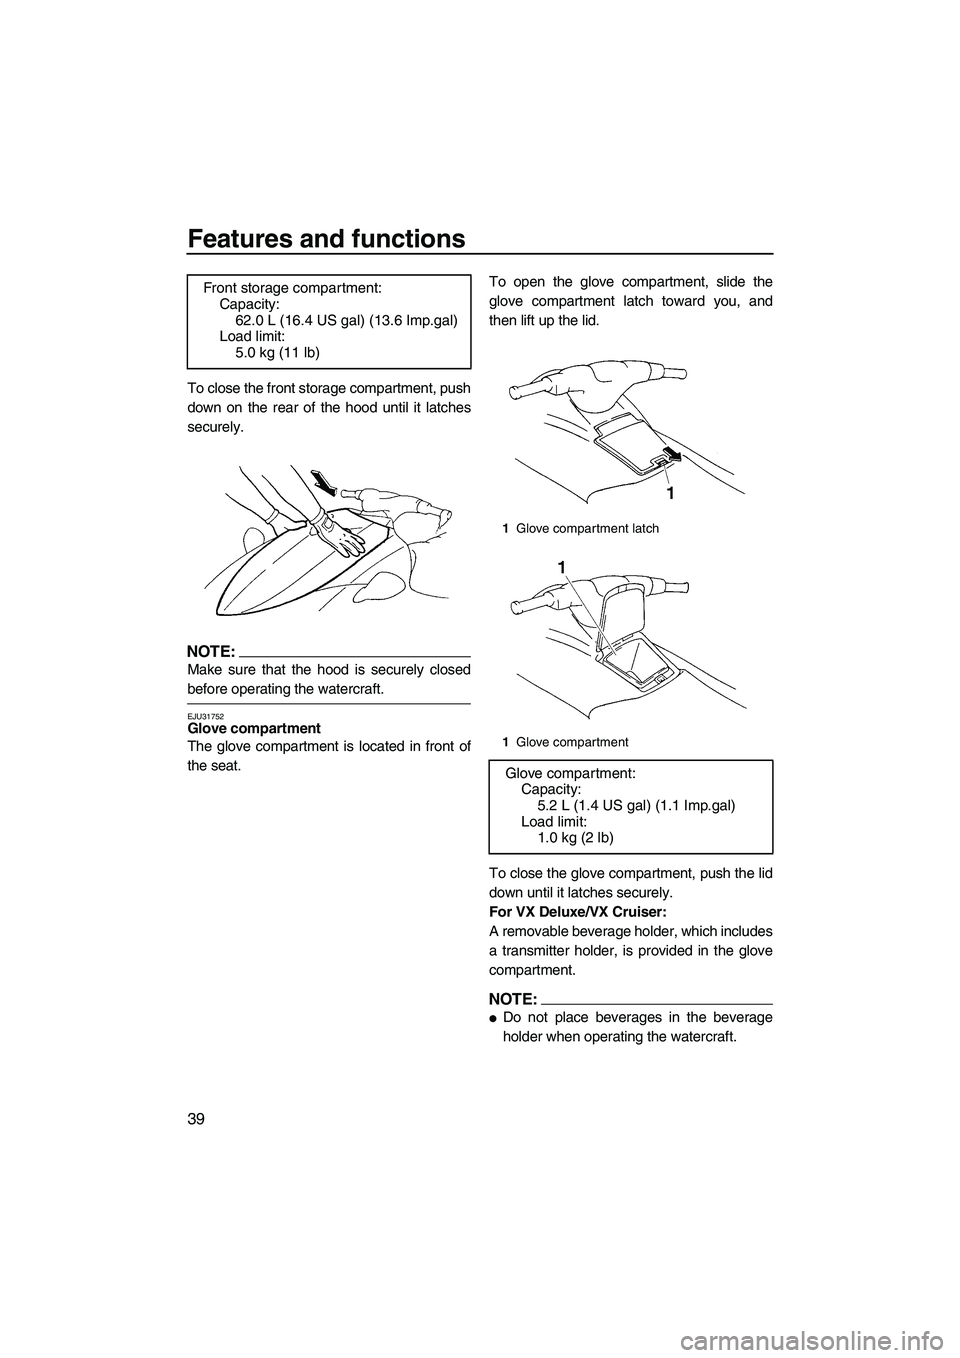 YAMAHA VX CRUISER 2007  Owners Manual Features and functions
39
To close the front storage compartment, push
down on the rear of the hood until it latches
securely.
NOTE:
Make sure that the hood is securely closed
before operating the wat